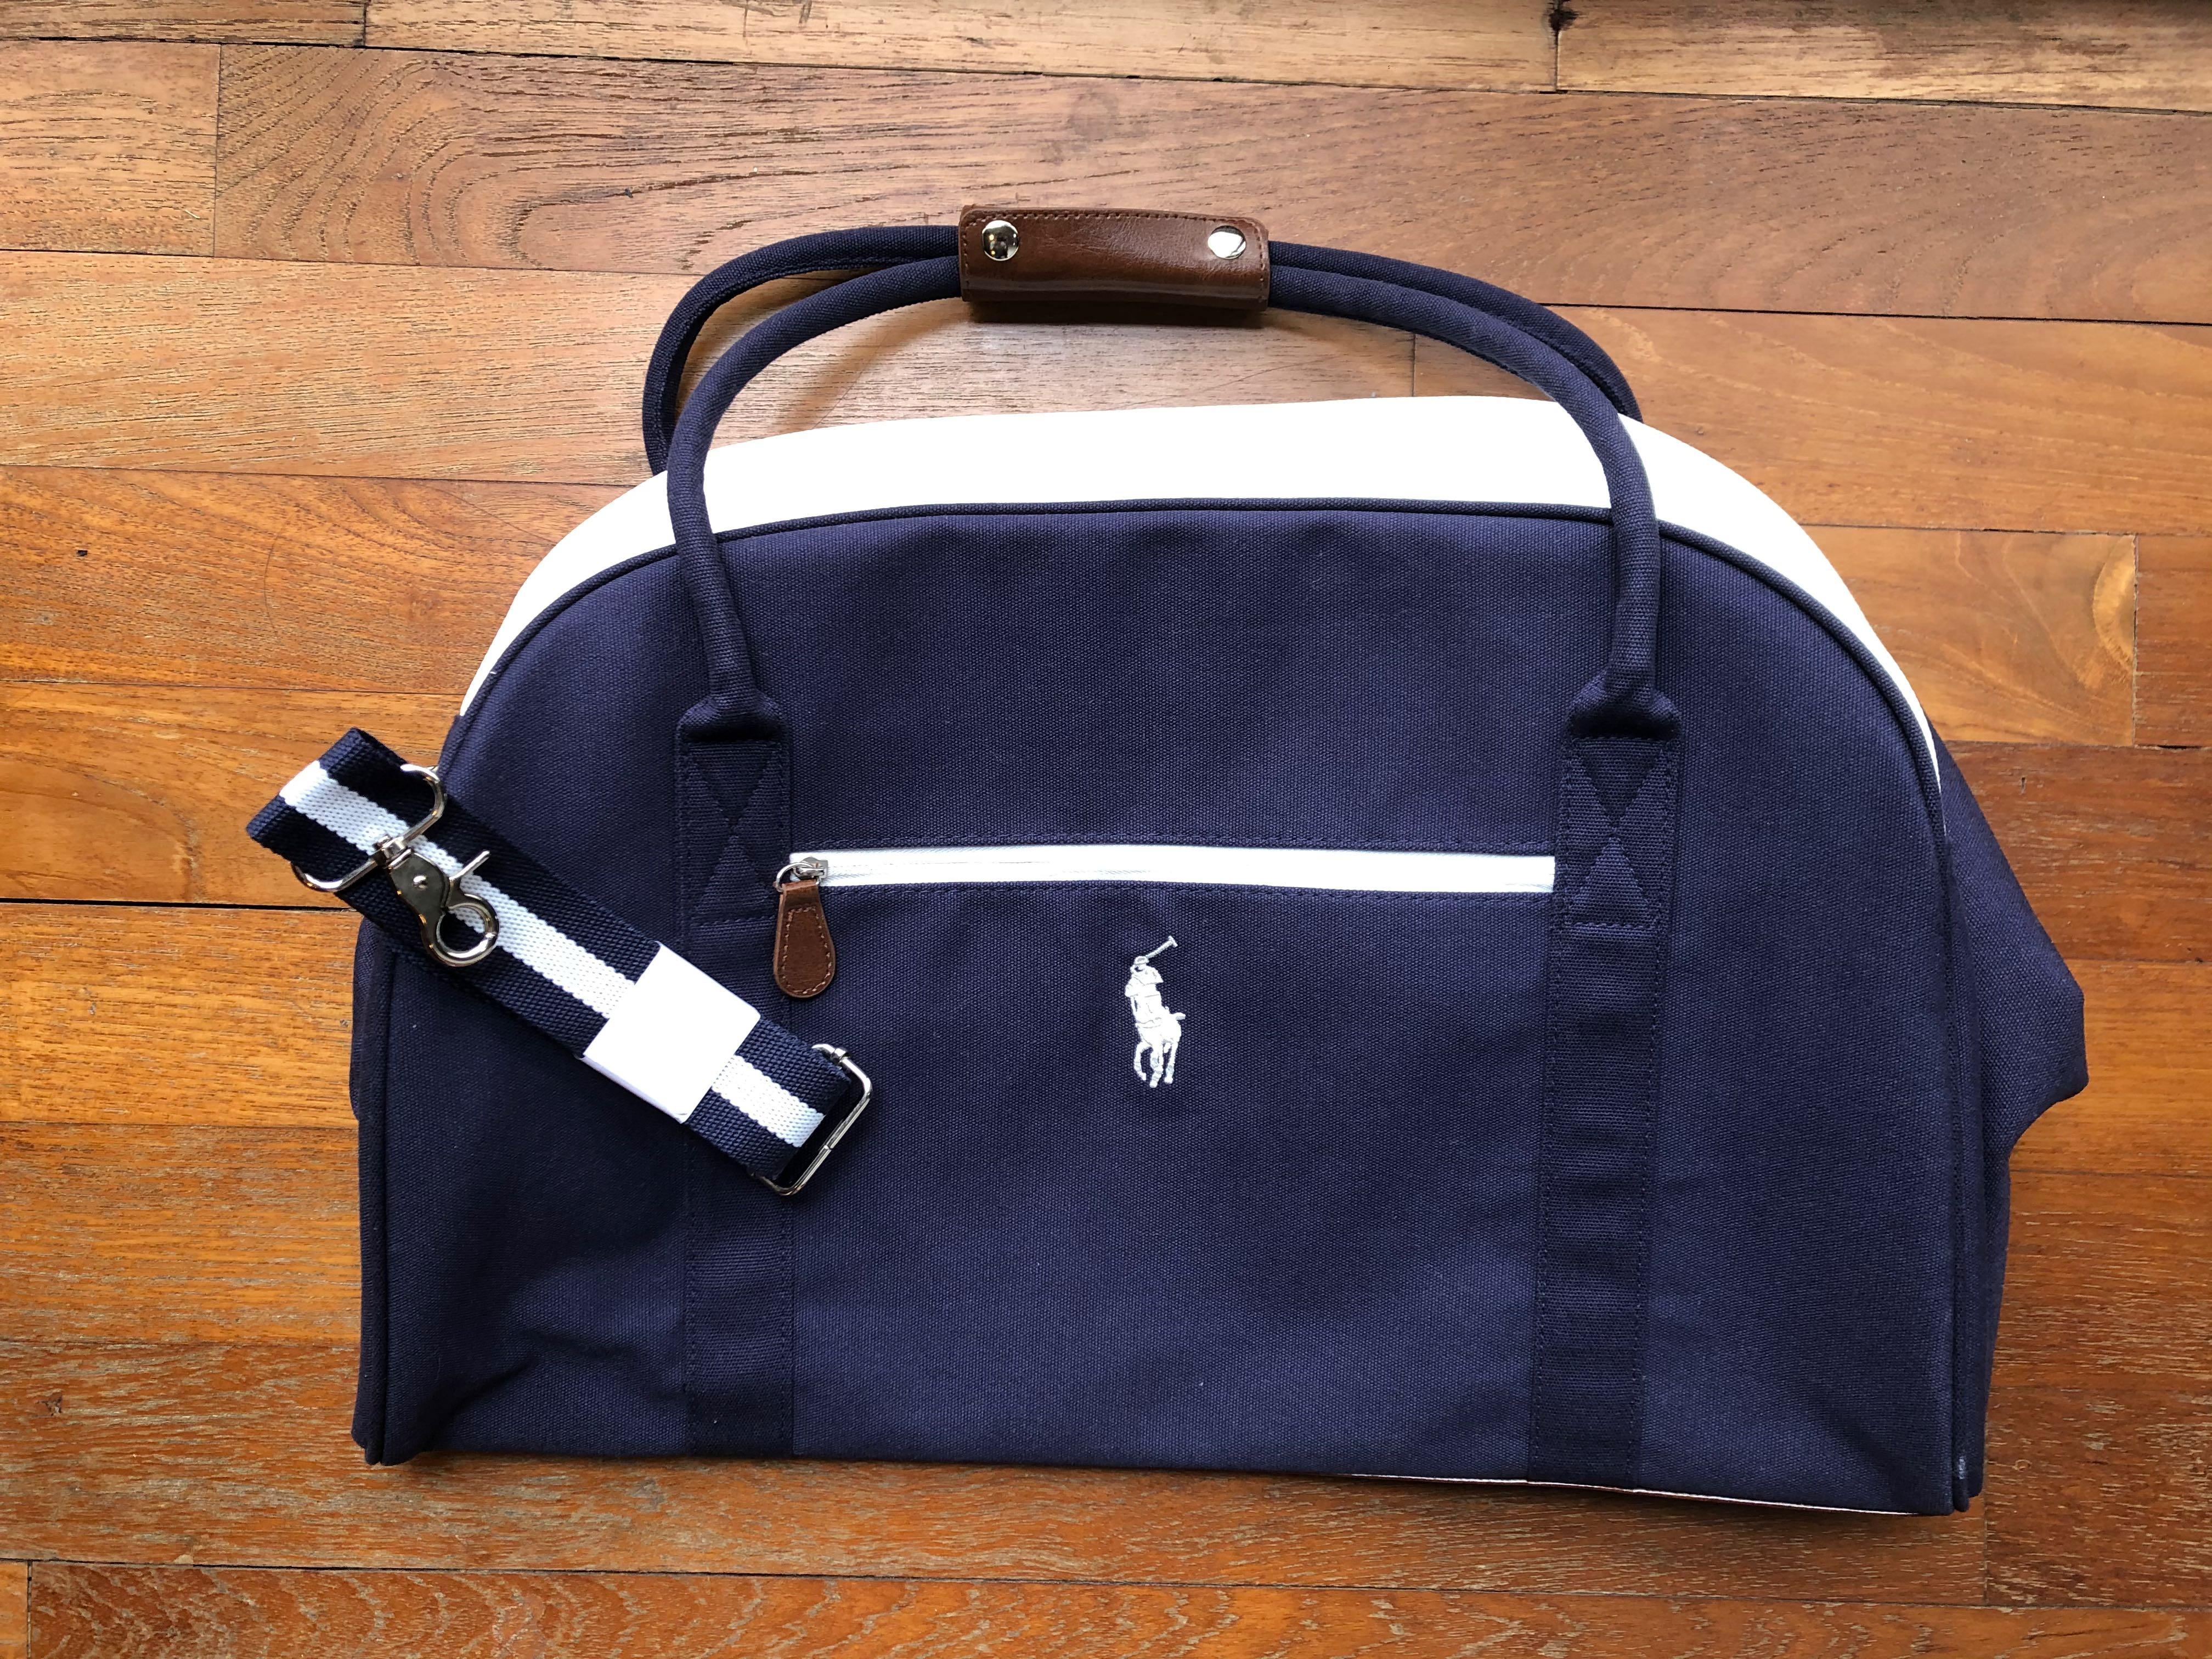 POLO RALPH LAUREN NAVY BLUE DUFFEL WEEKENDER TRAVEL BAG CARRY ON, Men's  Fashion, Bags, Sling Bags on Carousell